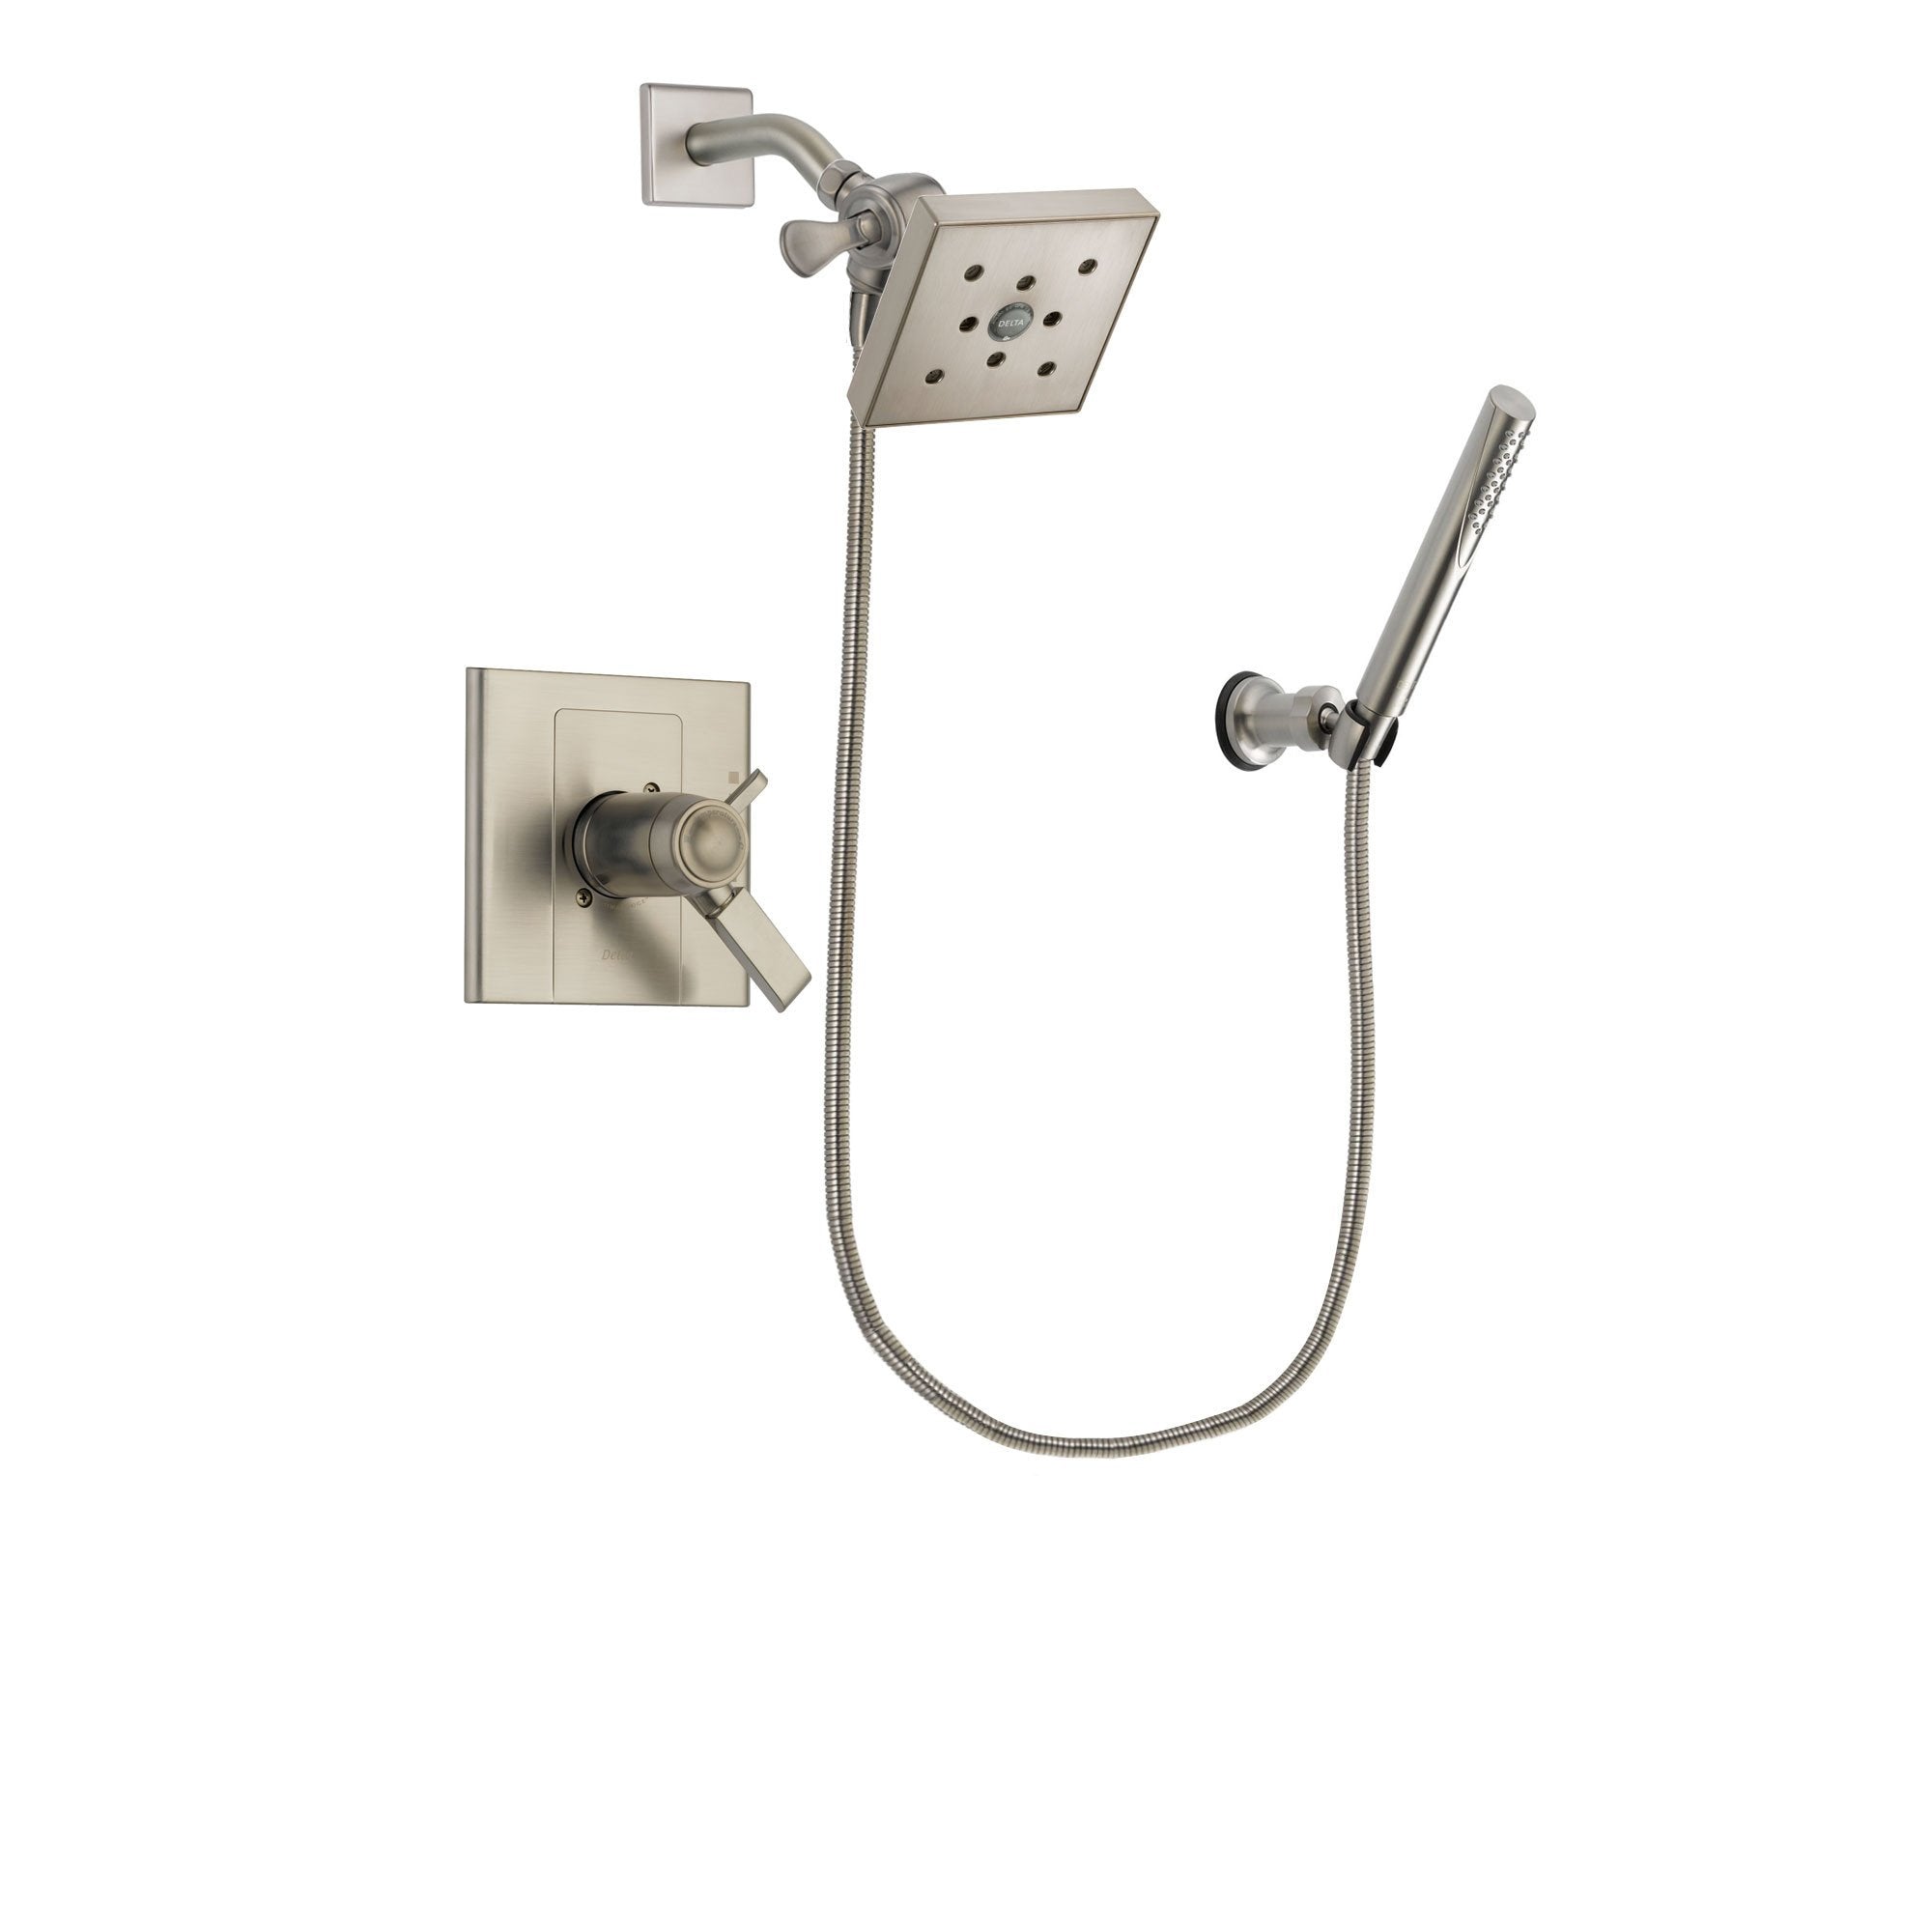 Delta Arzo Stainless Steel Finish Thermostatic Shower Faucet System Package with Square Shower Head and Modern Handheld Shower Spray Includes Rough-in Valve DSP2152V